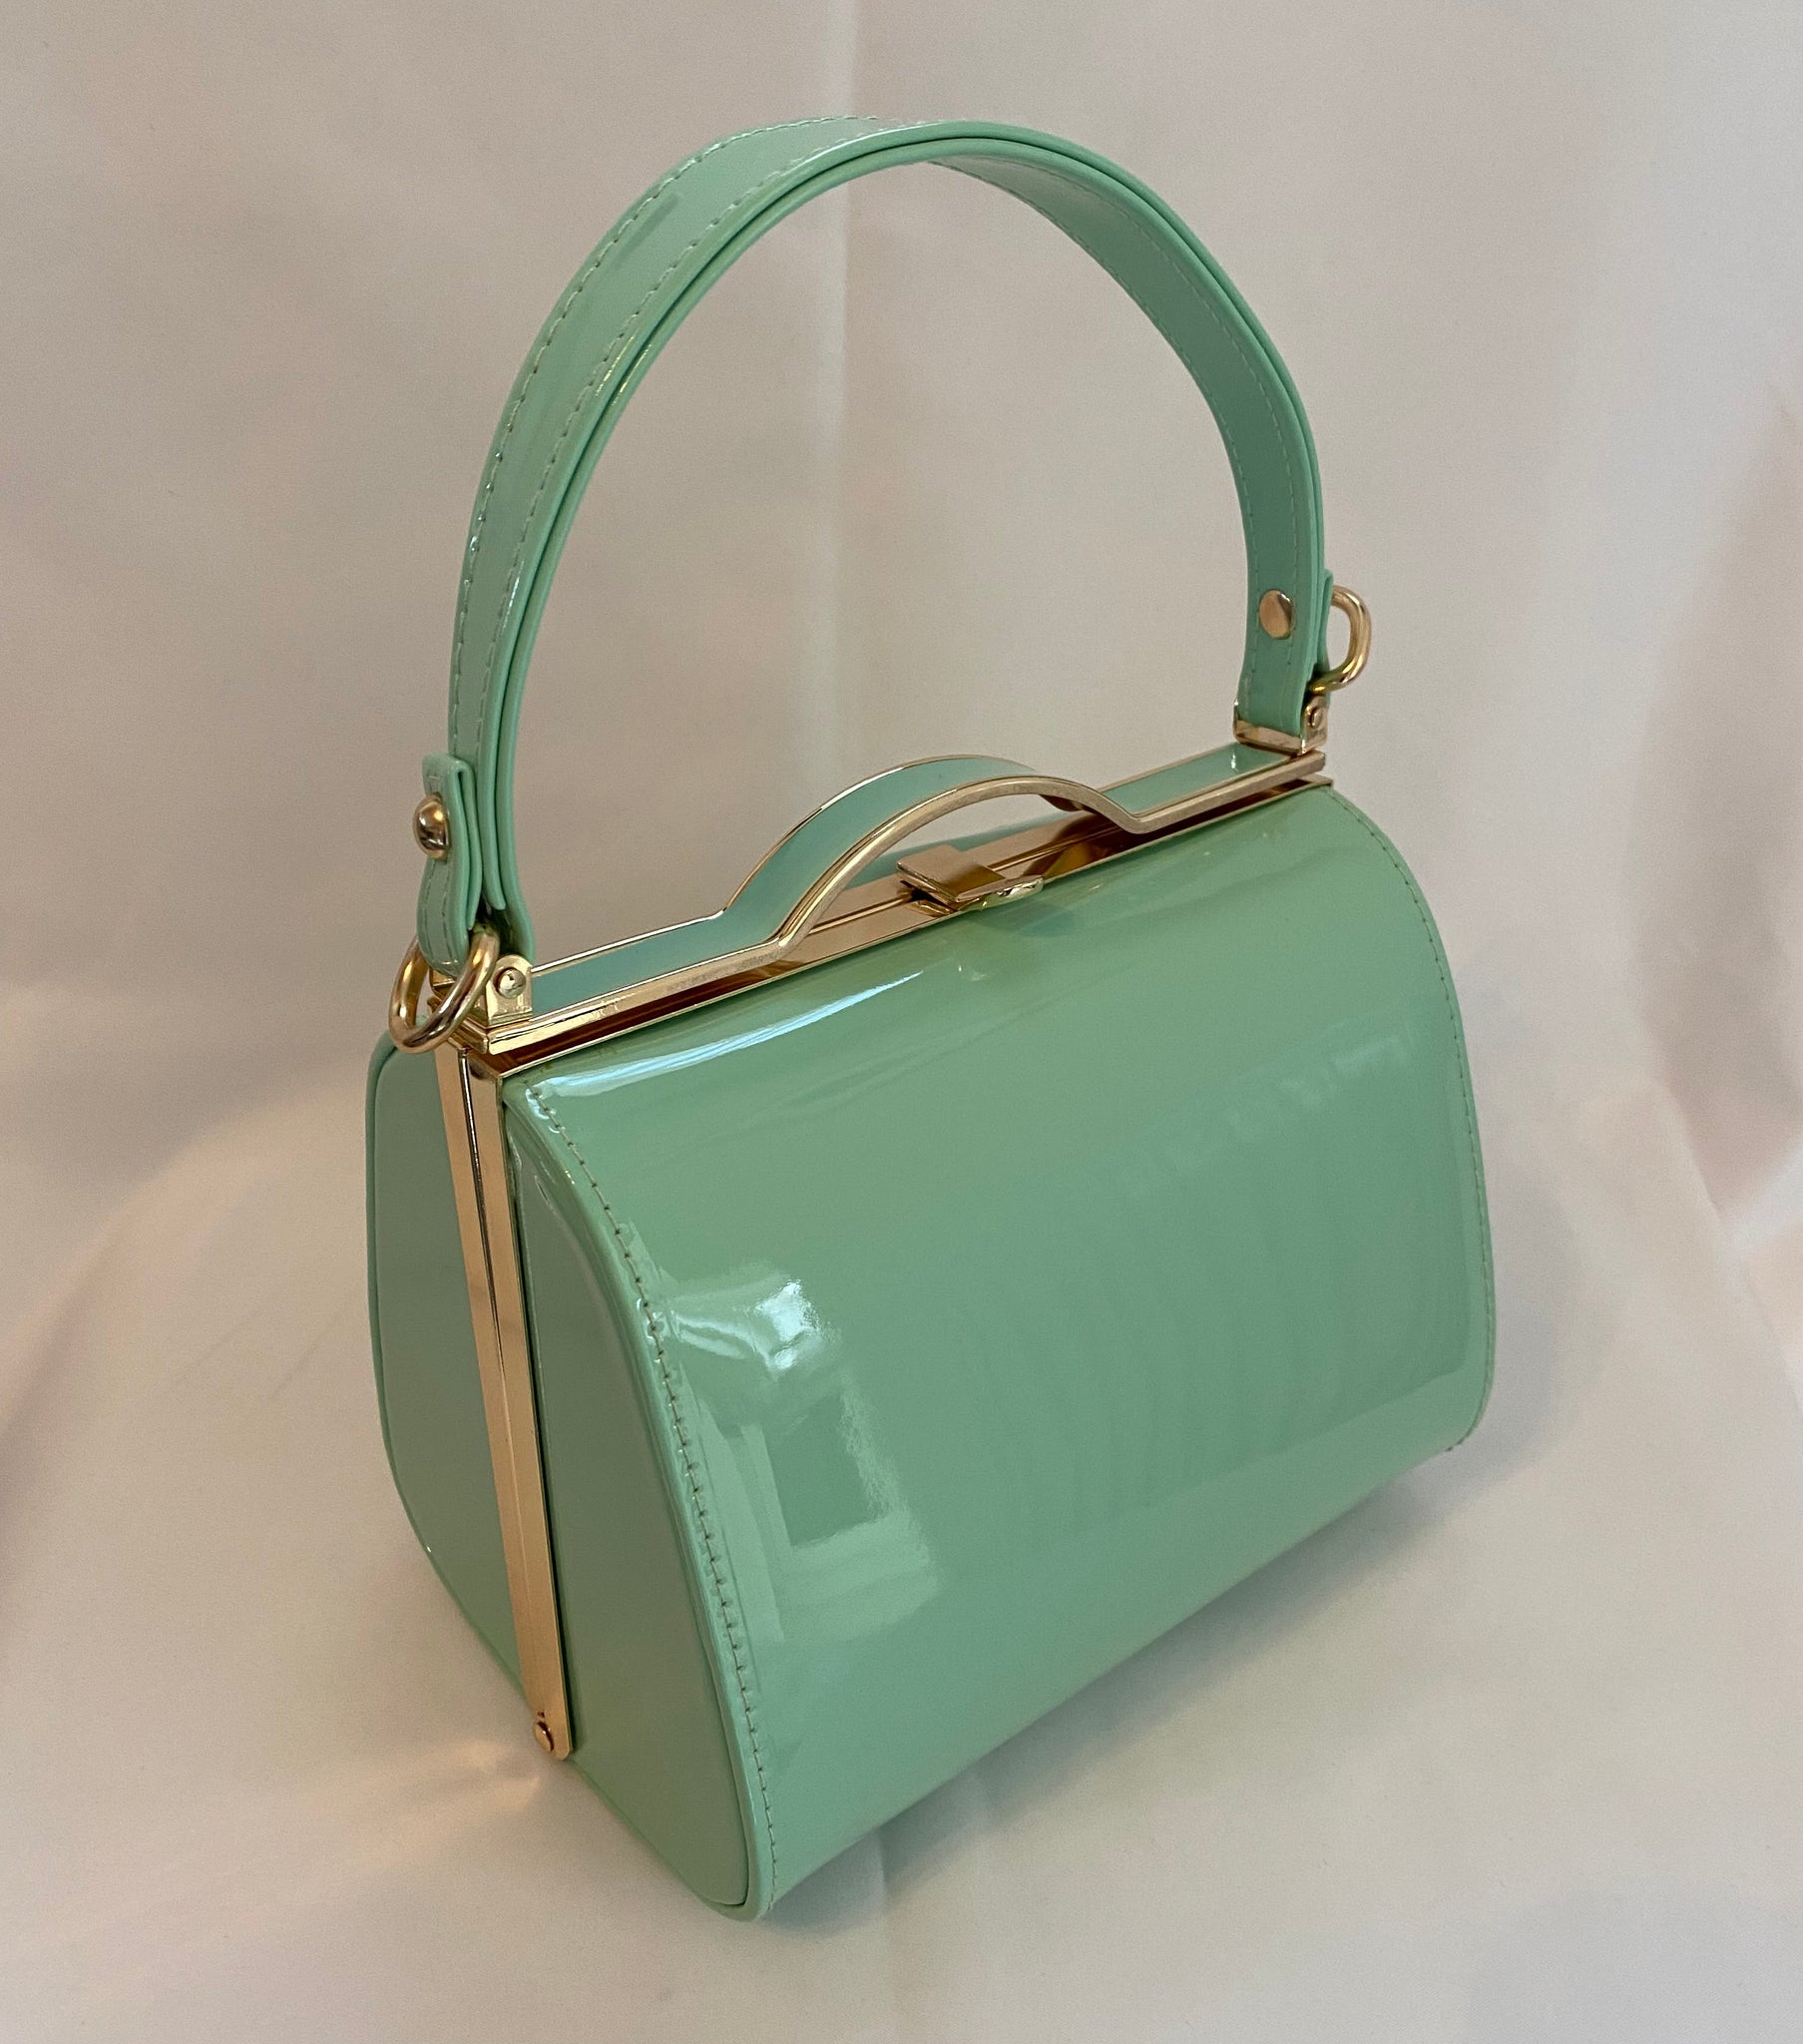 Classic Lilly Handbag in Mint Green - Vintage Inspired